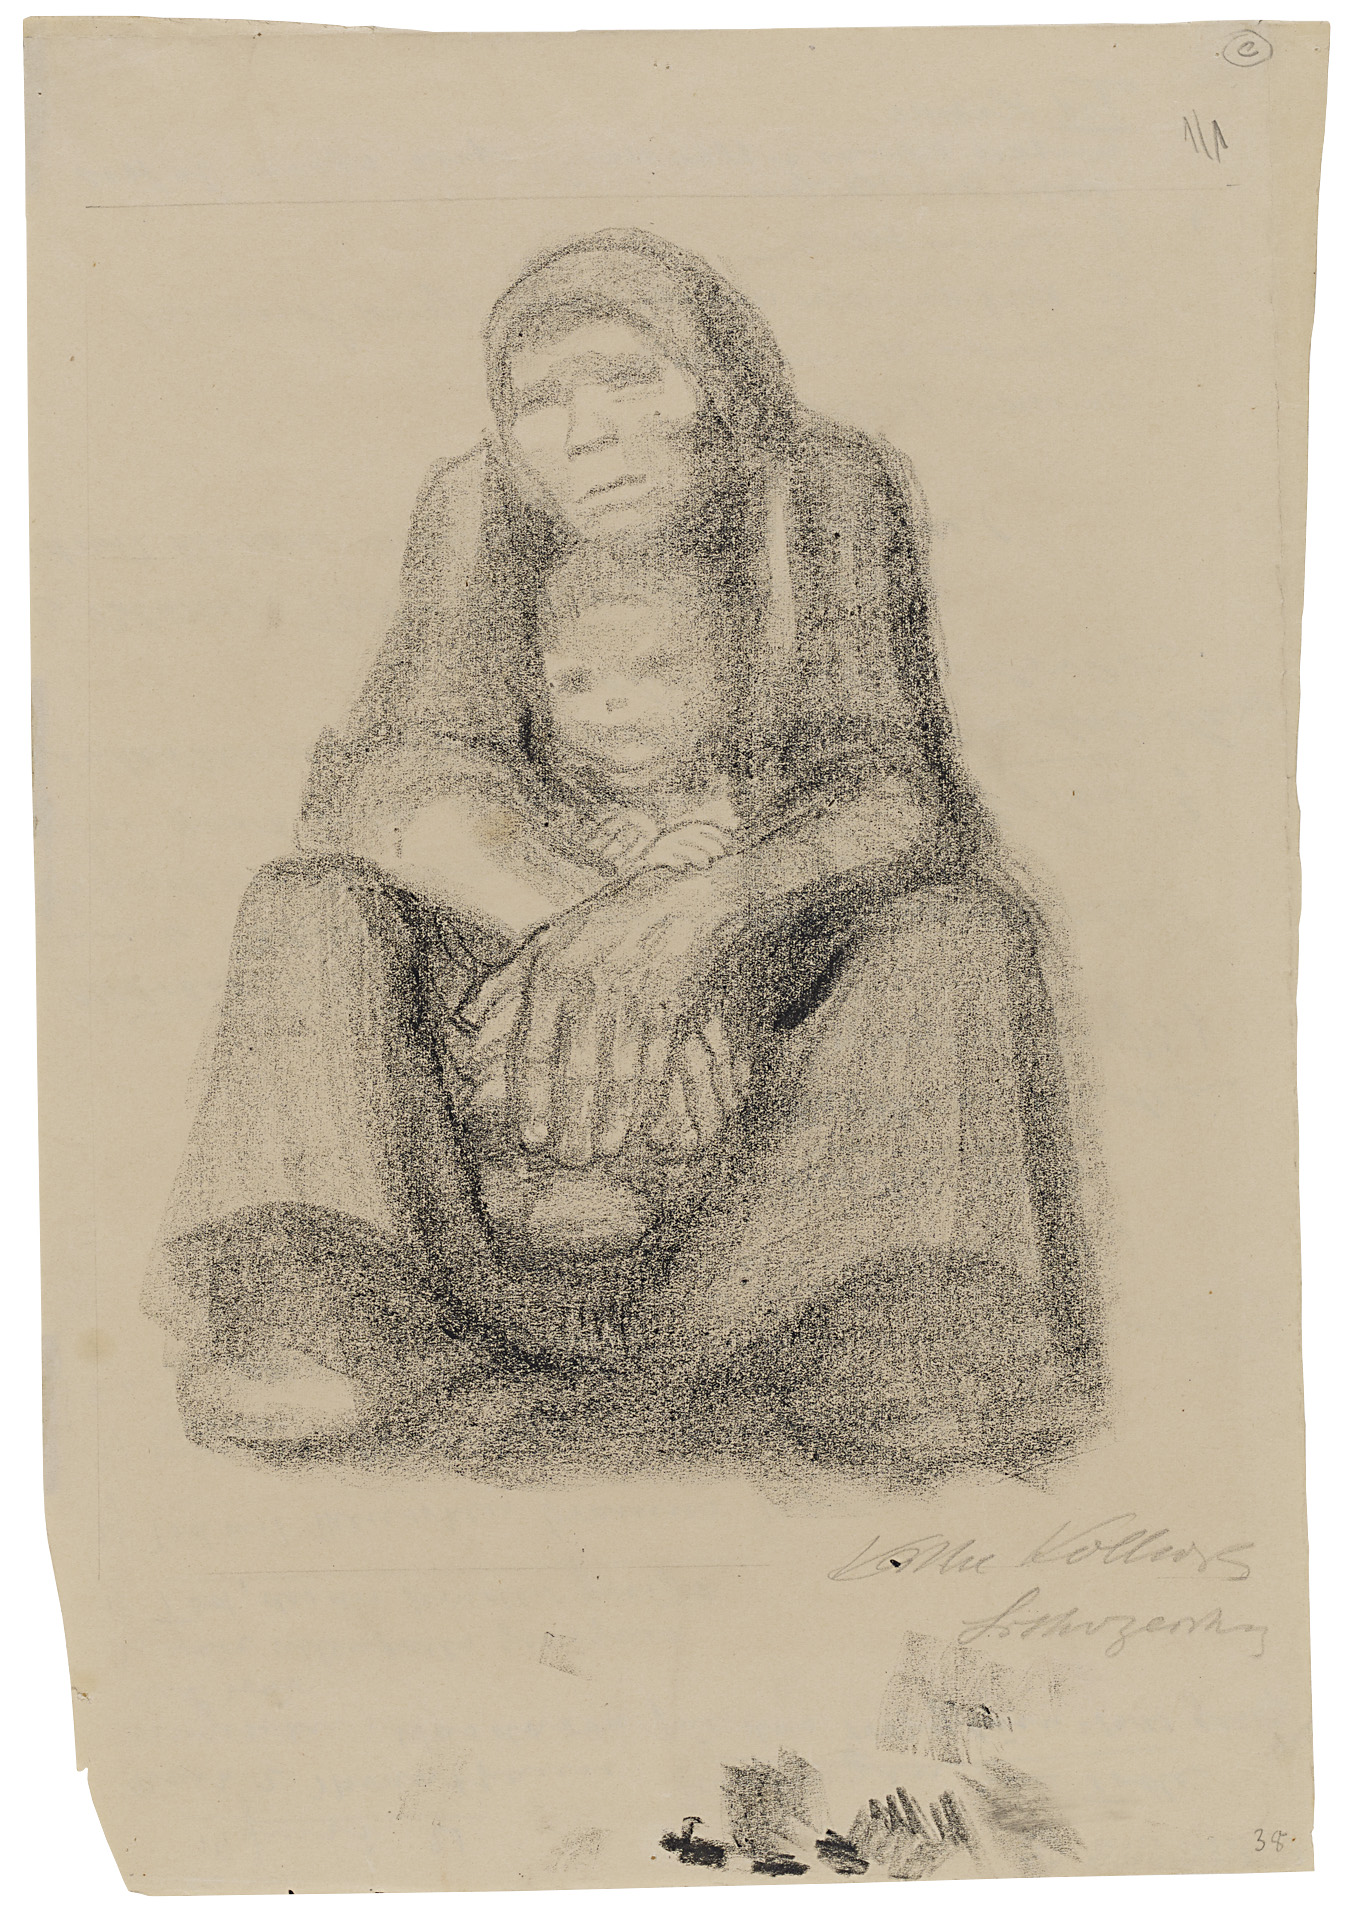 Käthe Kollwitz, Woman, seated, with Child on her Lap, 1921, lithographic drawing on brownish paper, NT 925, Cologne Kollwitz Collection © Käthe Kollwitz Museum Köln 